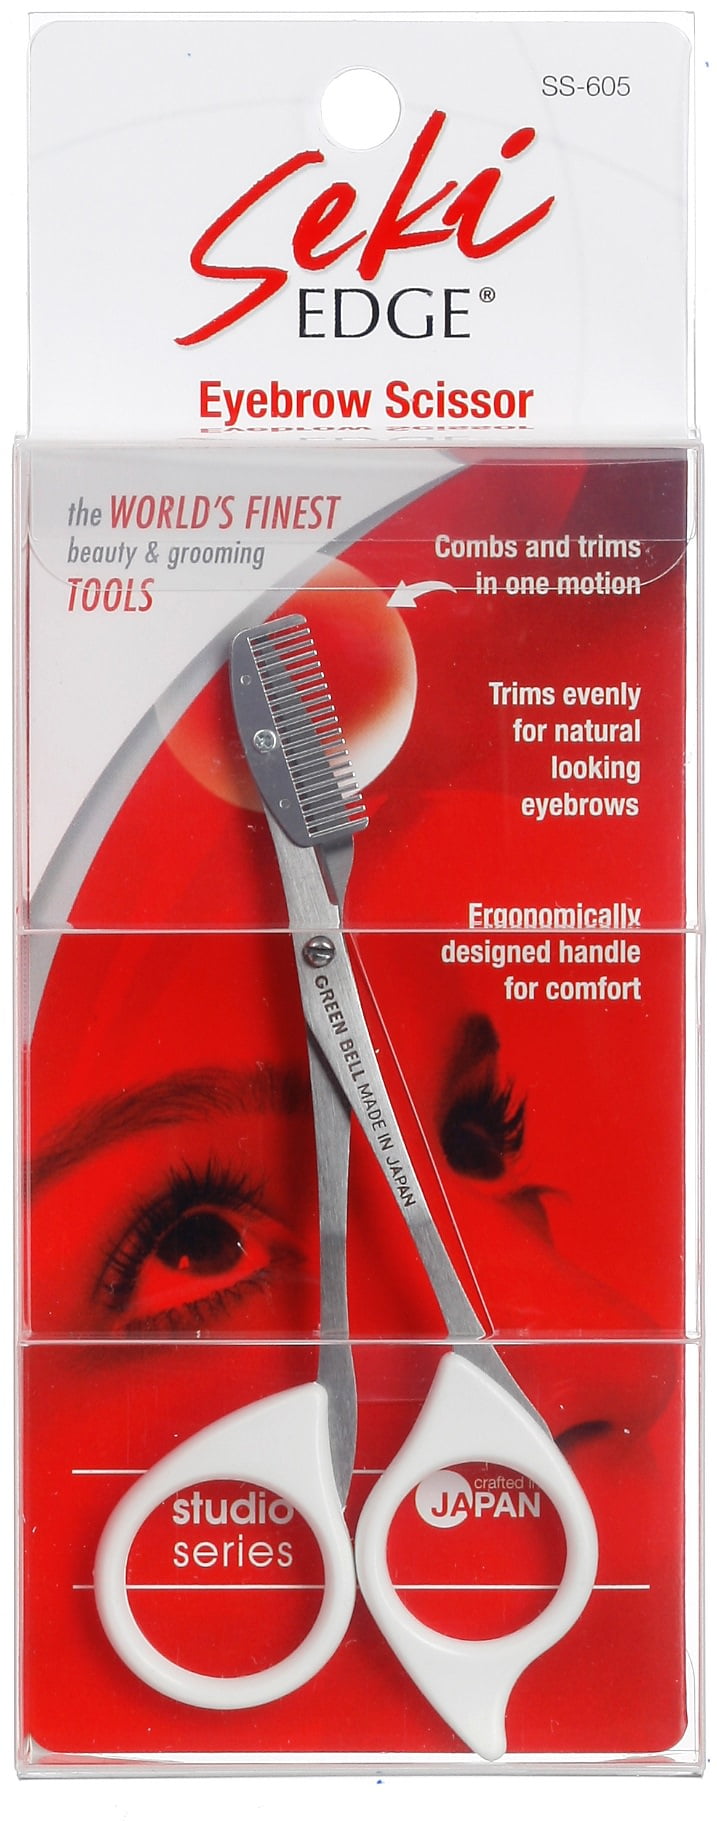 Nylea Eyebrow Scissors Trimmer with Razor - Brow Shaping with